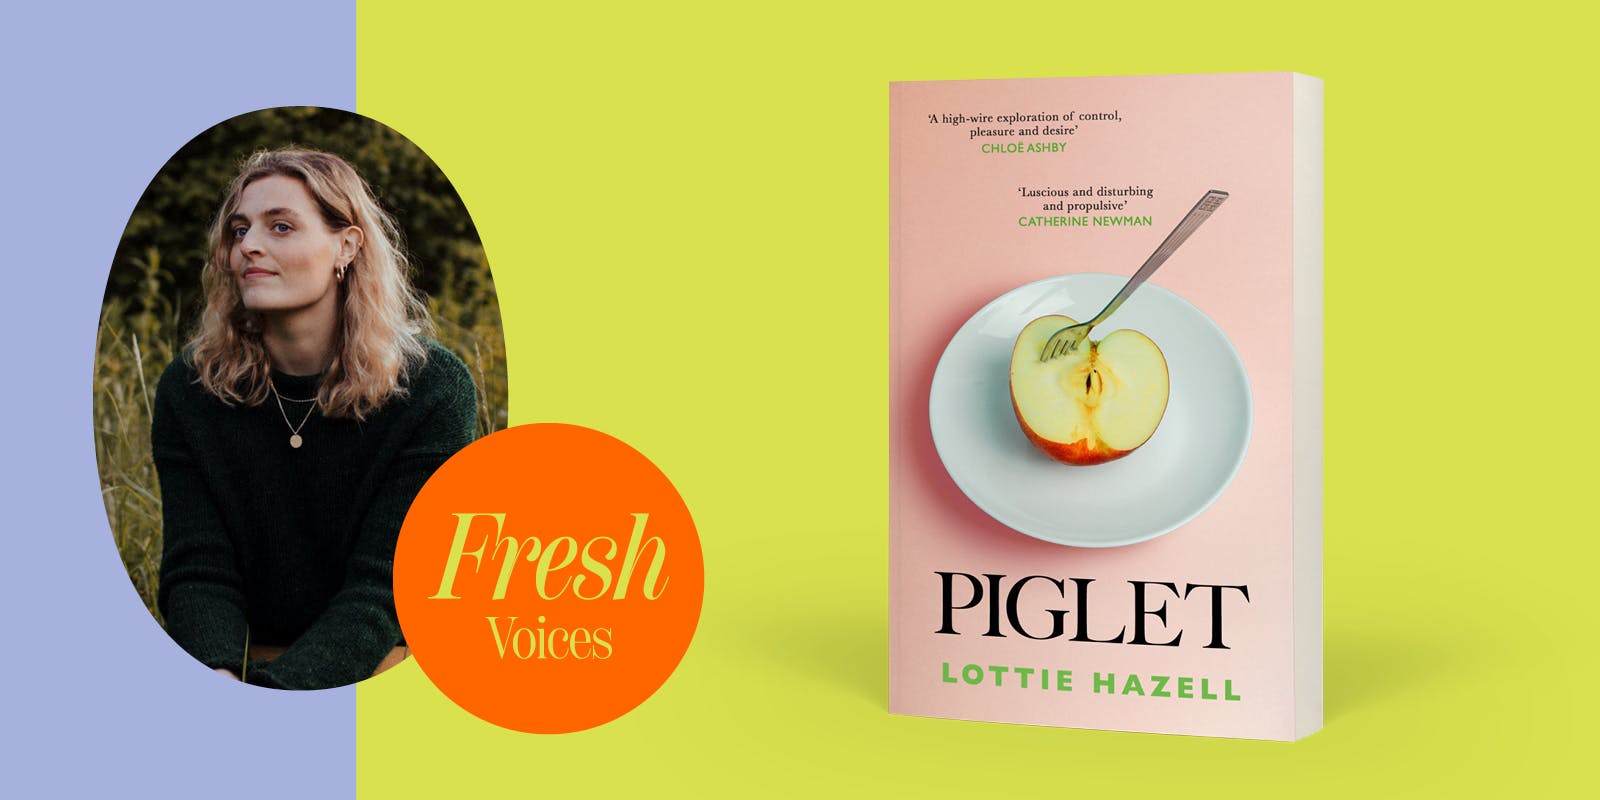 Lottie Hazell shares how she came up with the idea for Piglet